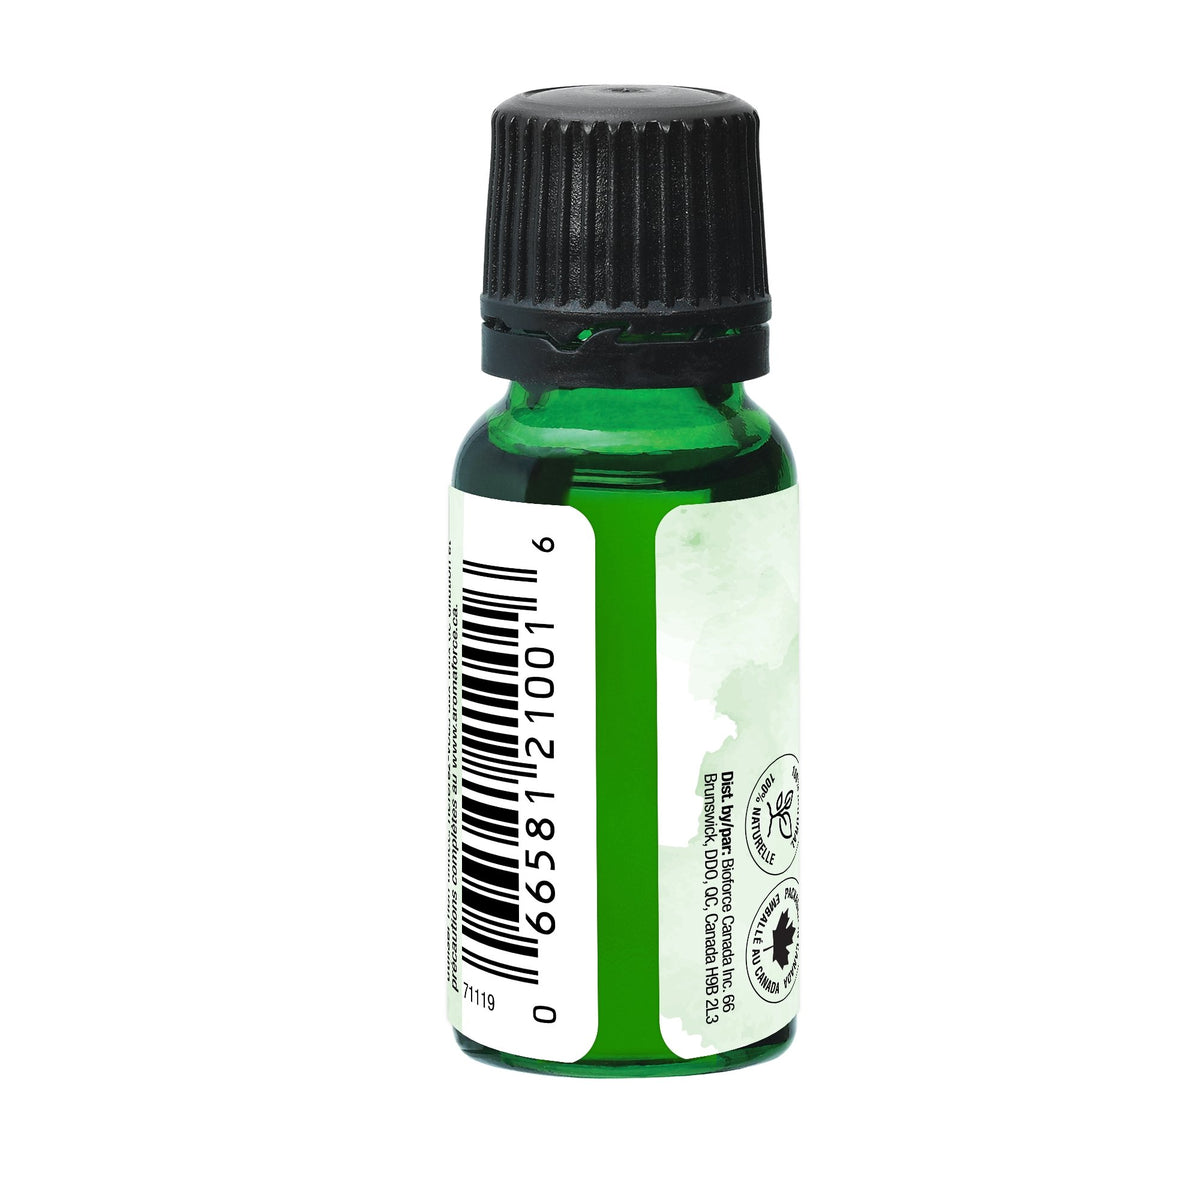 Aromaforce Ylang ylang Essential Oil 15mL - A.Vogel Canada